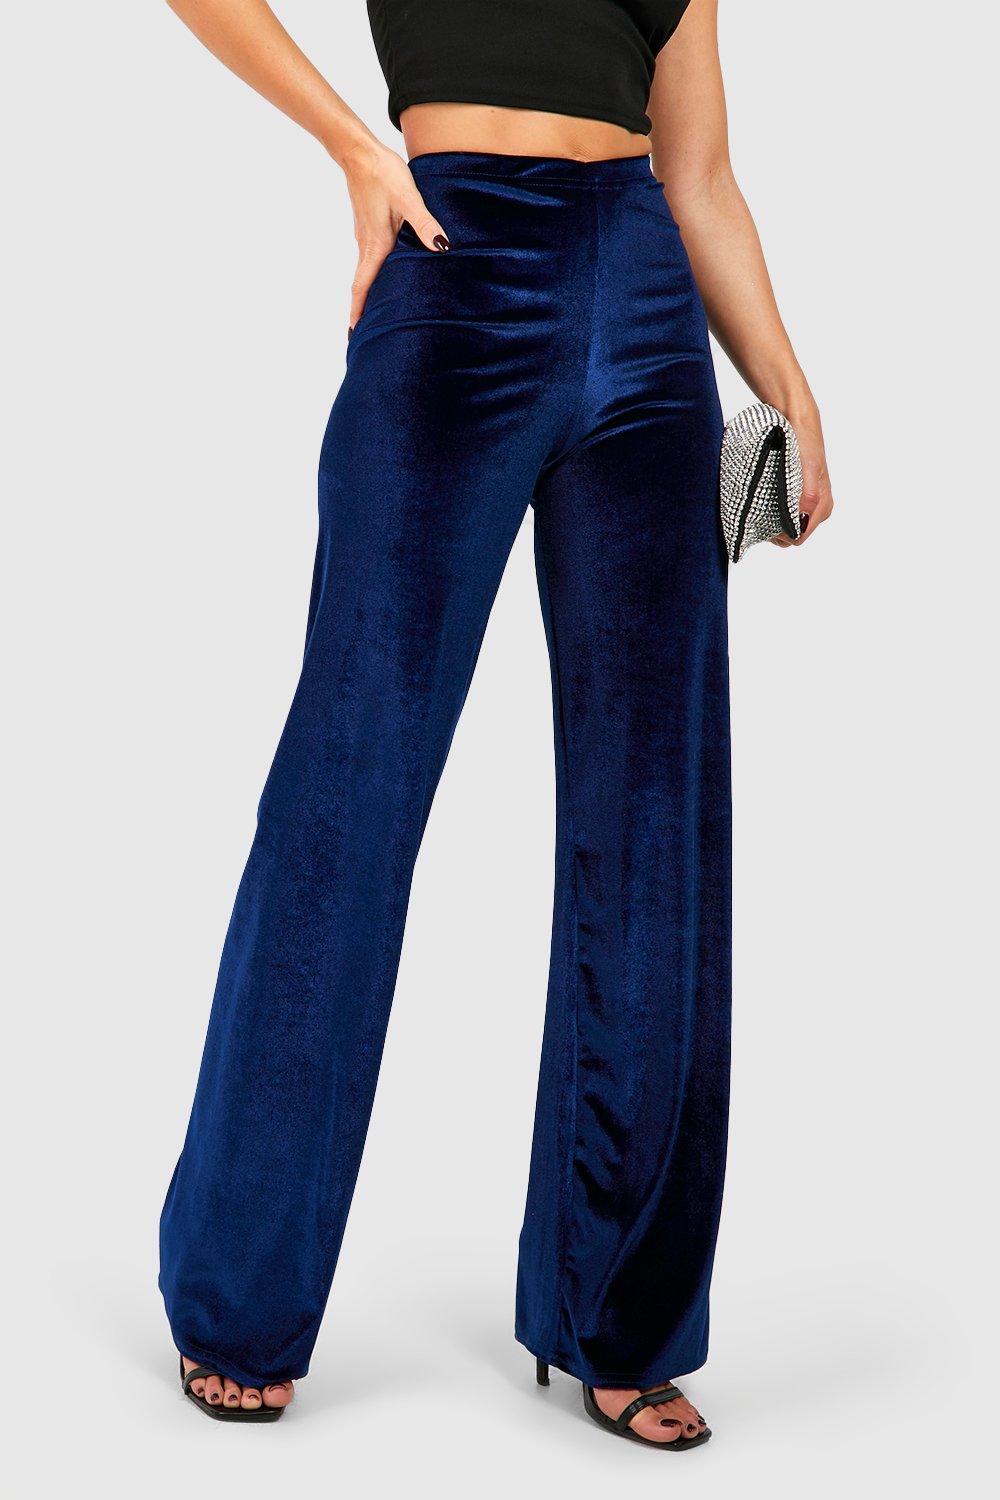 Velvet High Waisted Tapered TrousersWith